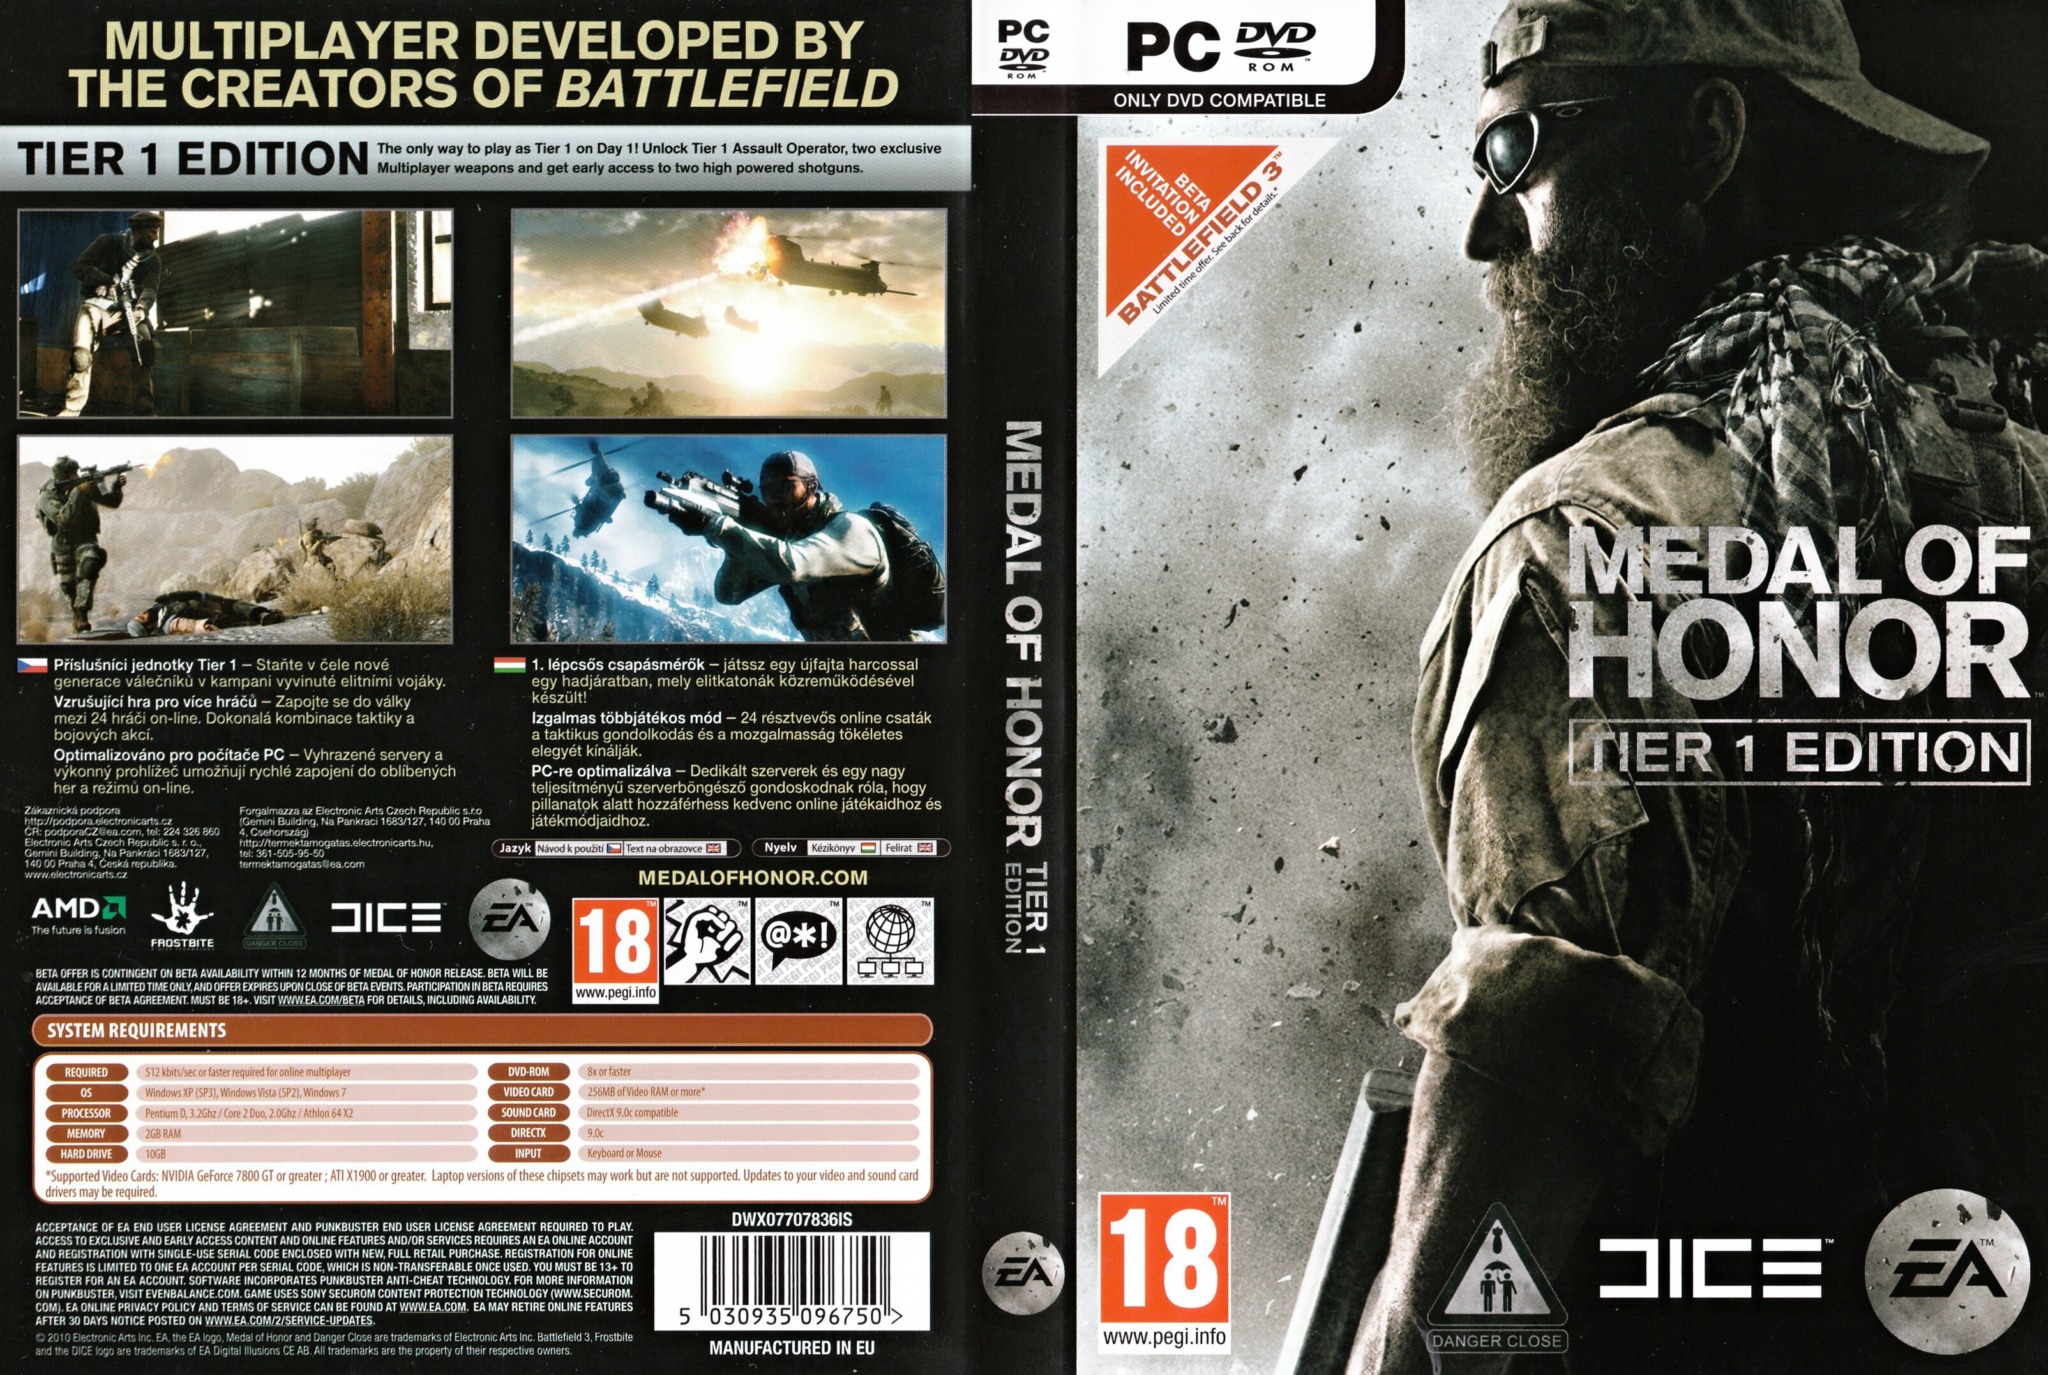 Medal of honor edition. Medal of Honor Limited Edition управление с ПС 3. Medal of Honor 2010 обложка. Medal of Honor за линией фронта. Сборник игр на диске ПК Medal of Honor.